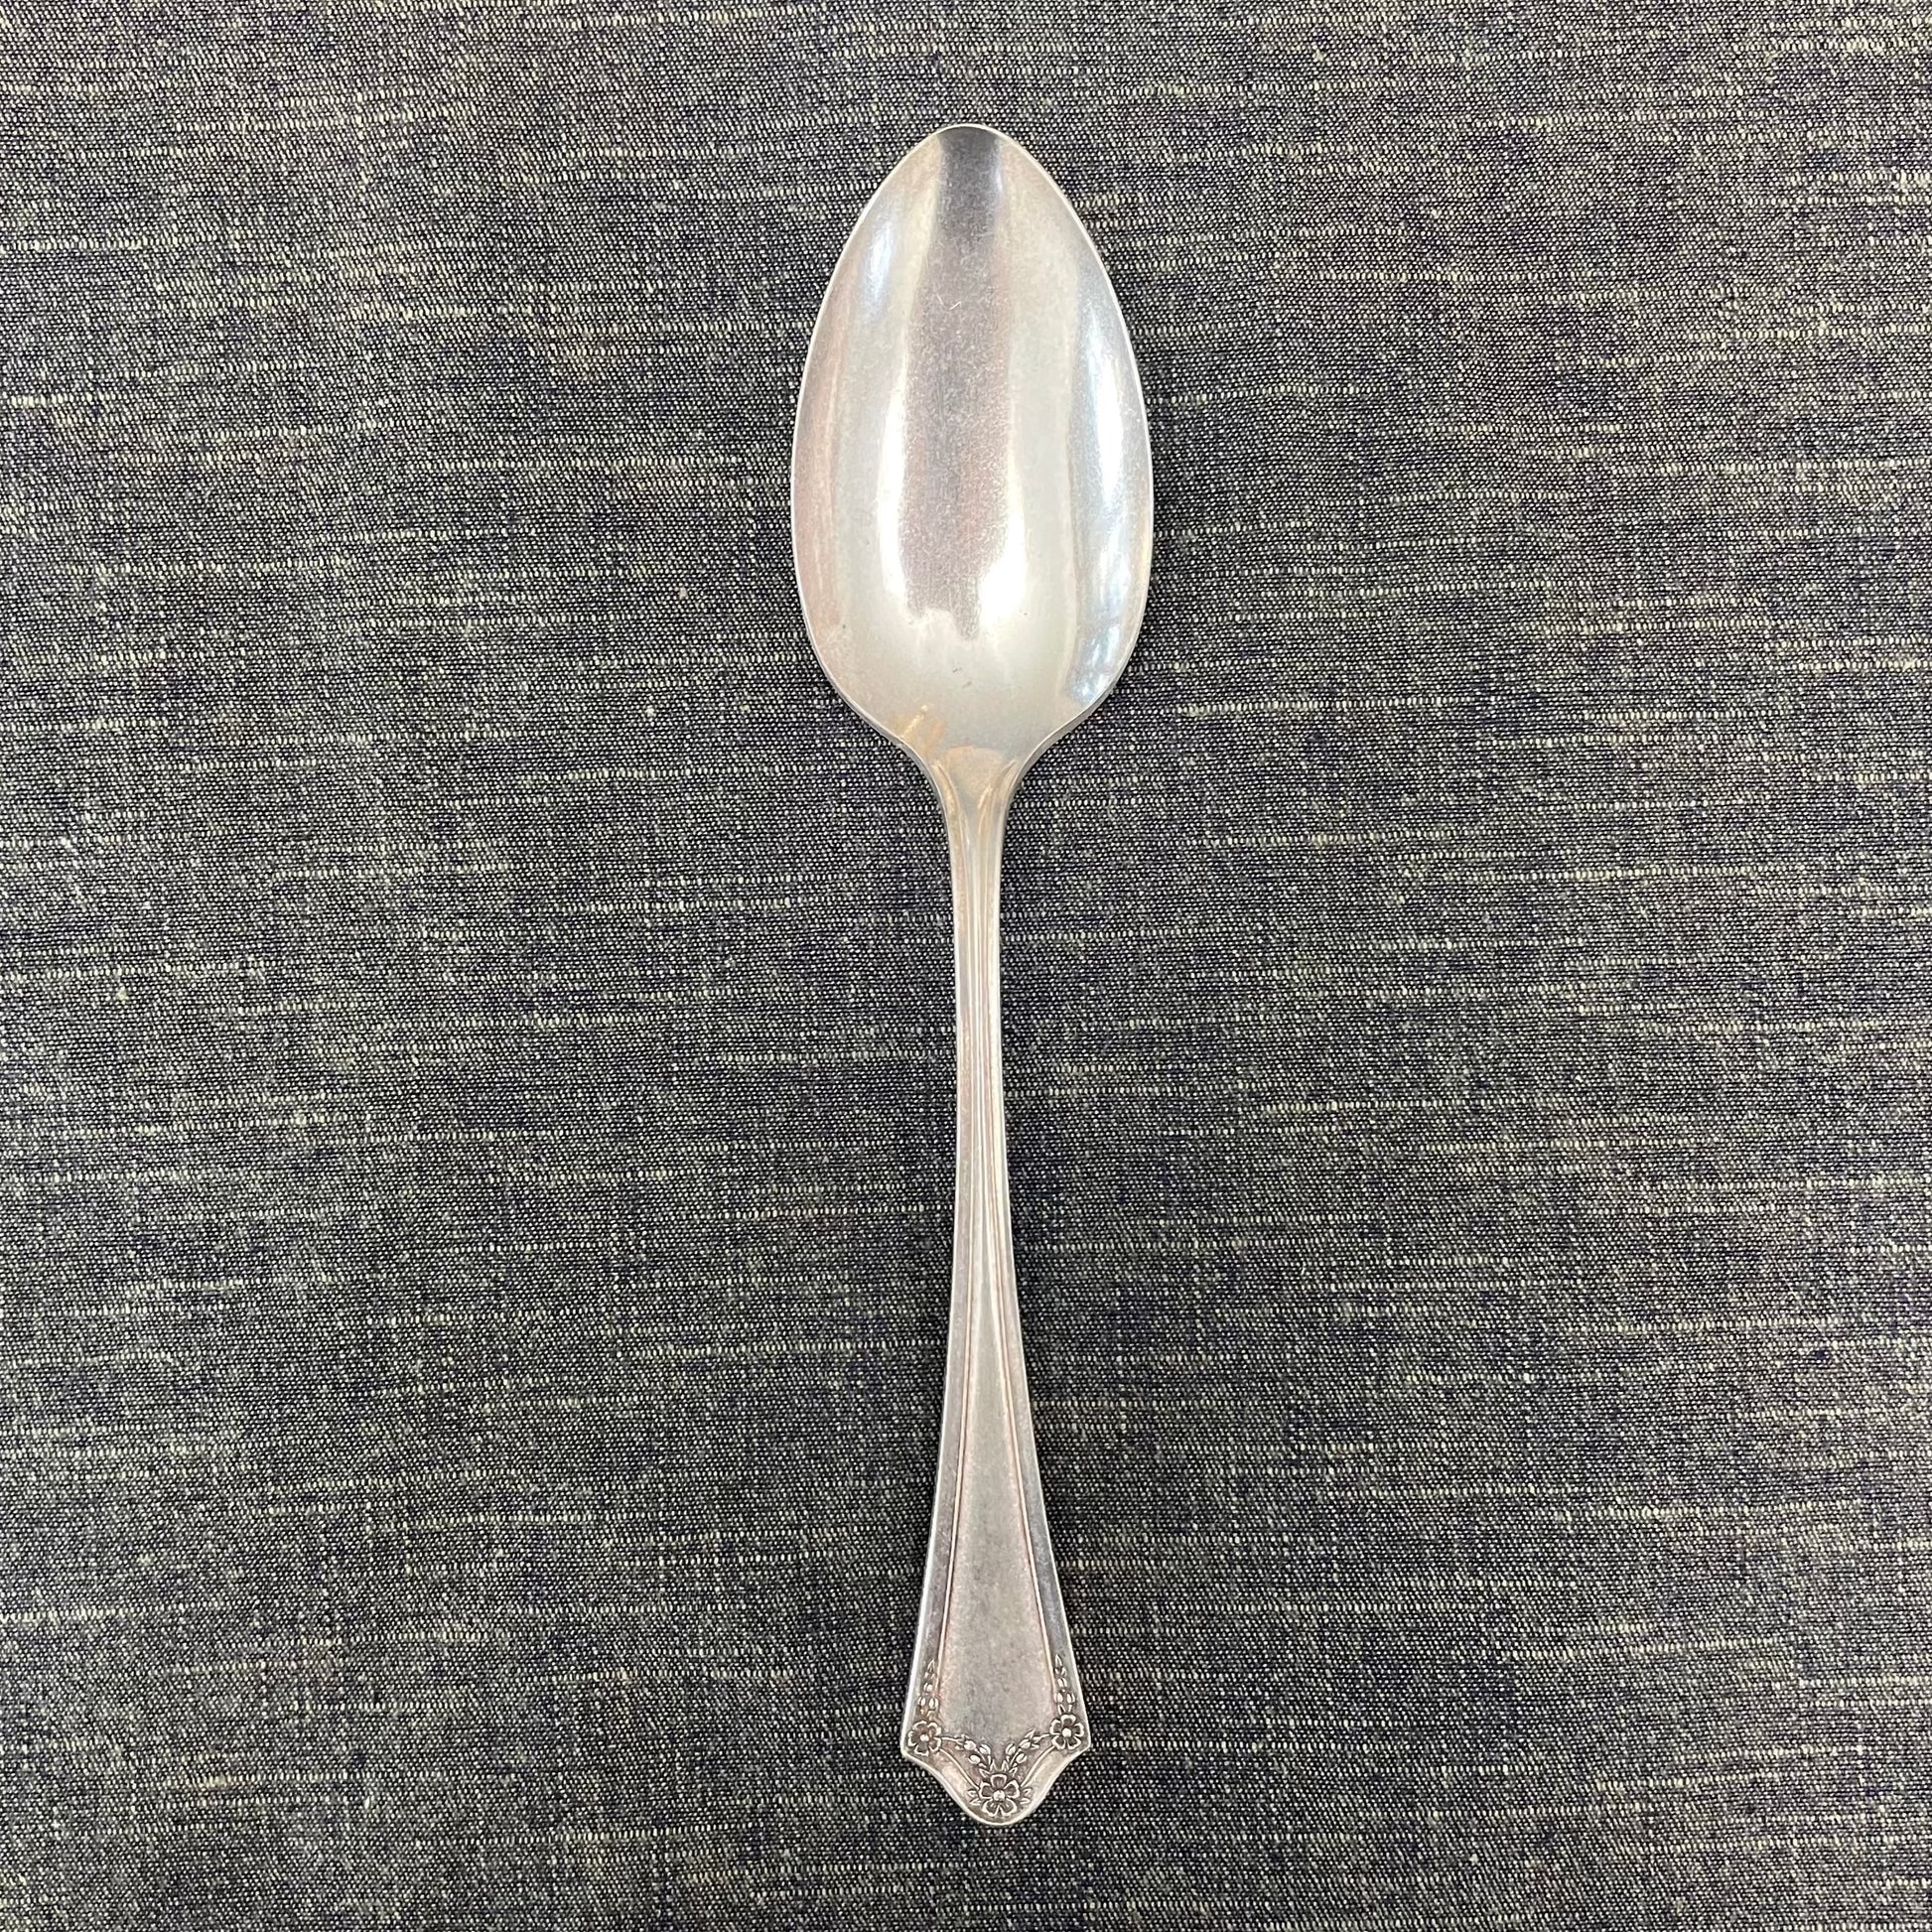 antique silver serving spoon or prop photography